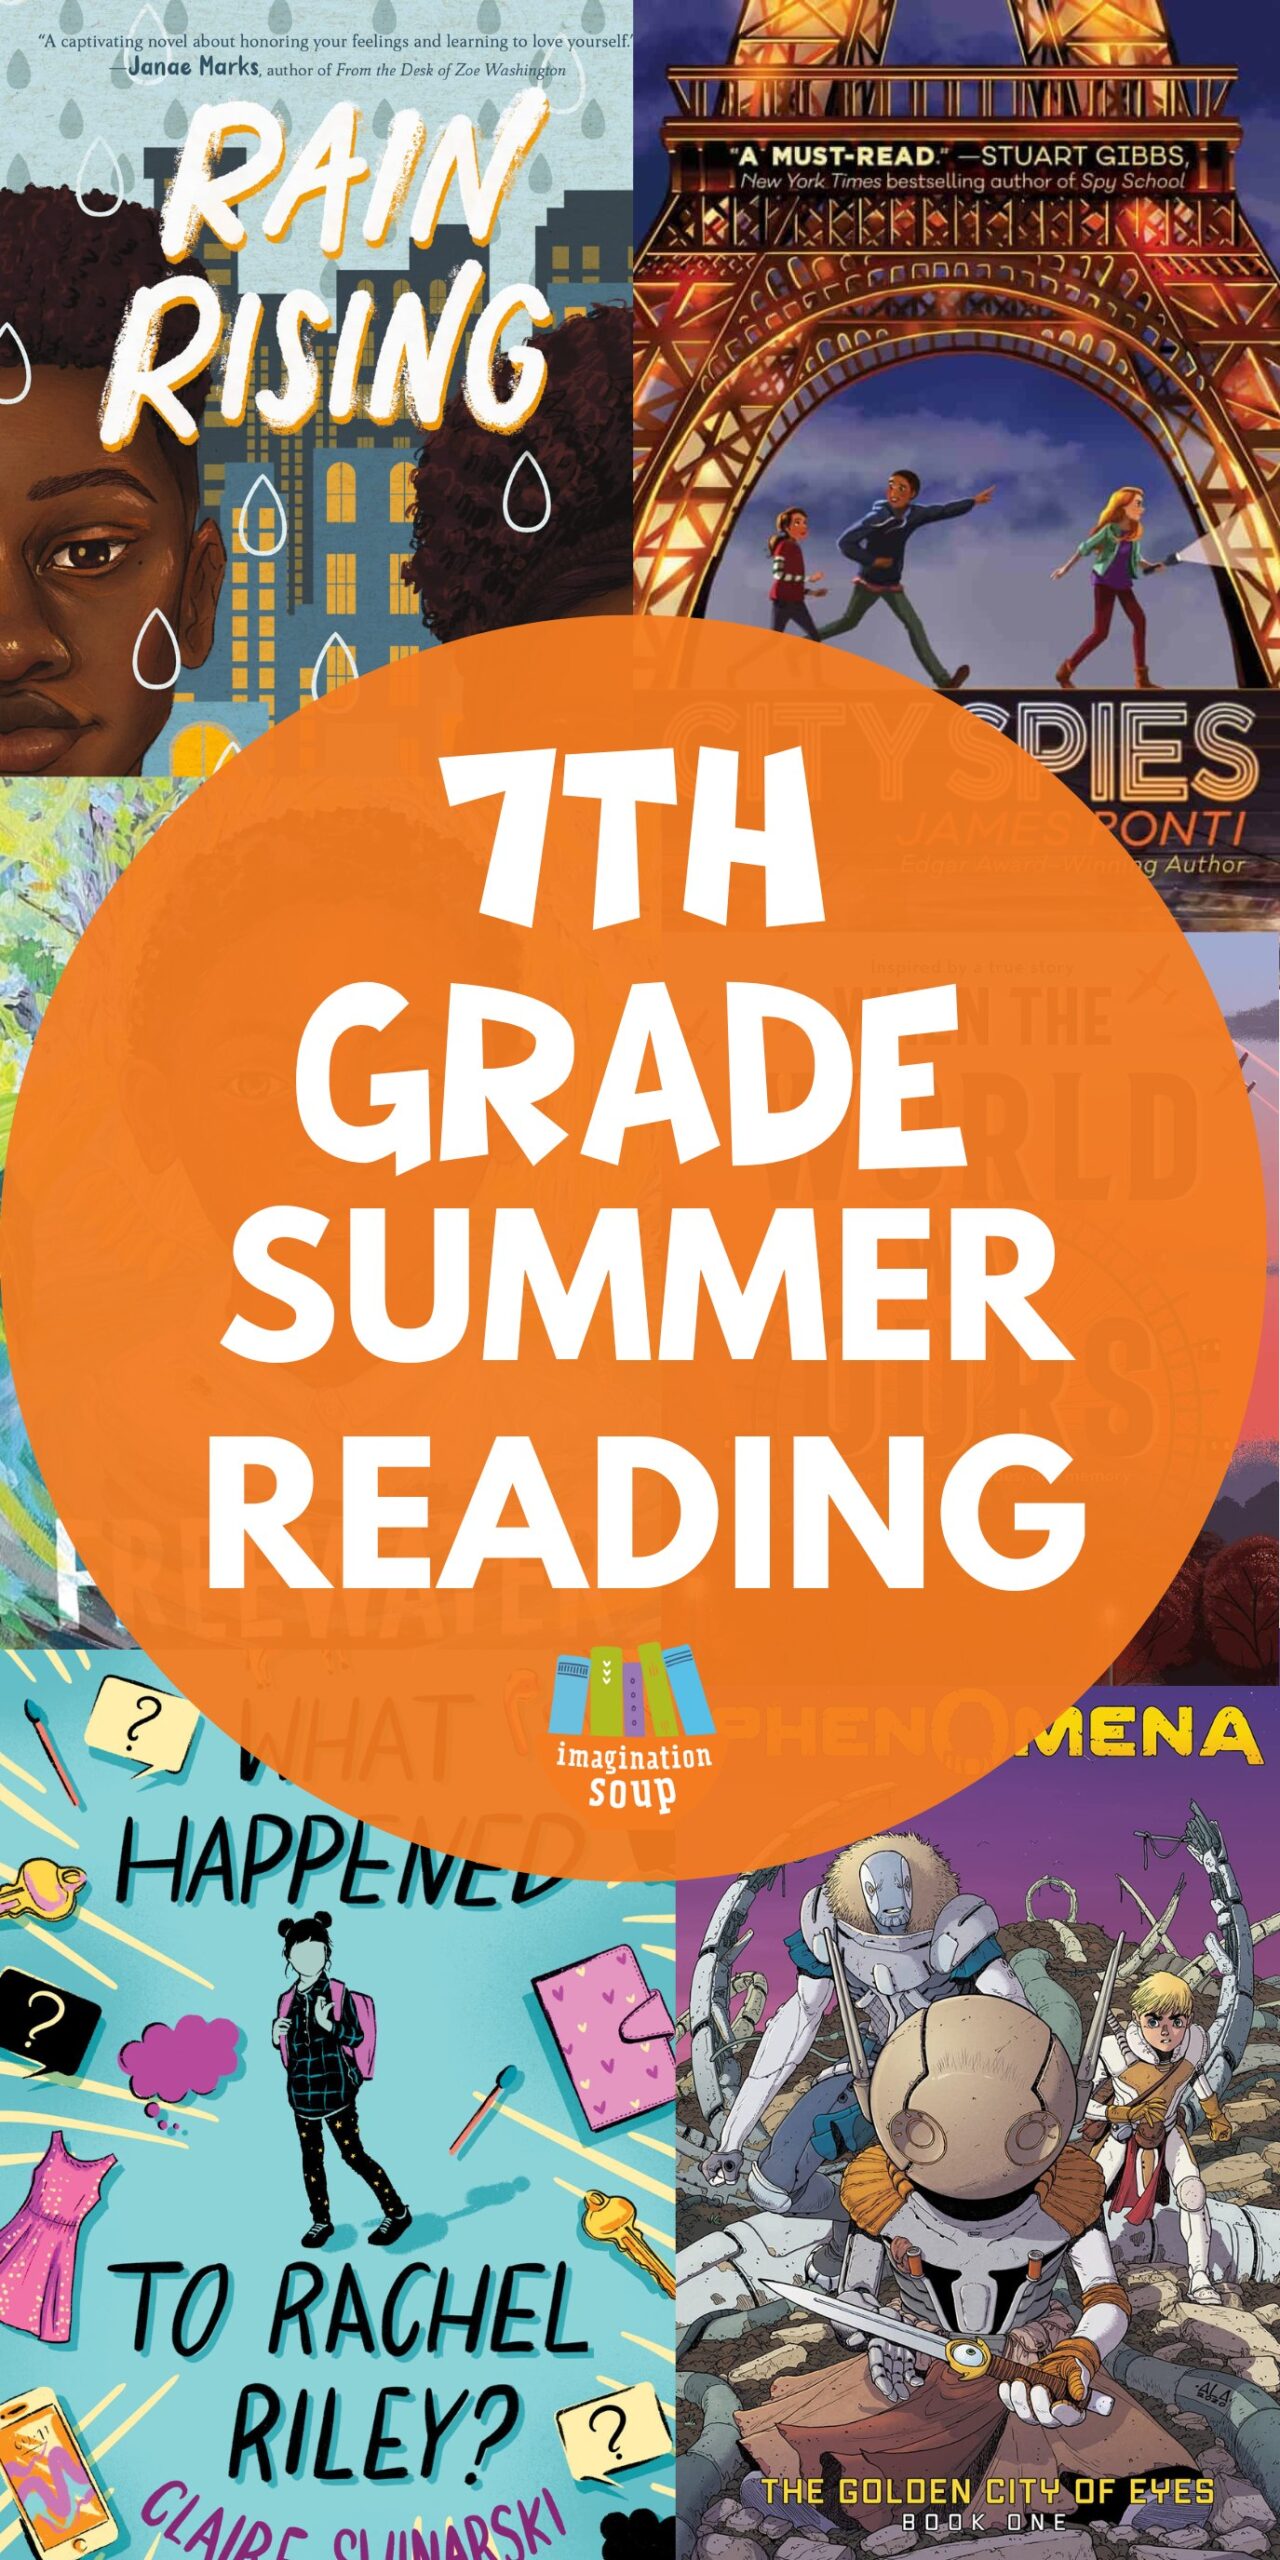 I think the hardest age for summer reading is middle school, don't you? Try these good books for 7th graders for summer reading (age 12 - 13) and see if they entice your middle schoolers to read throughout the dog days of summer.